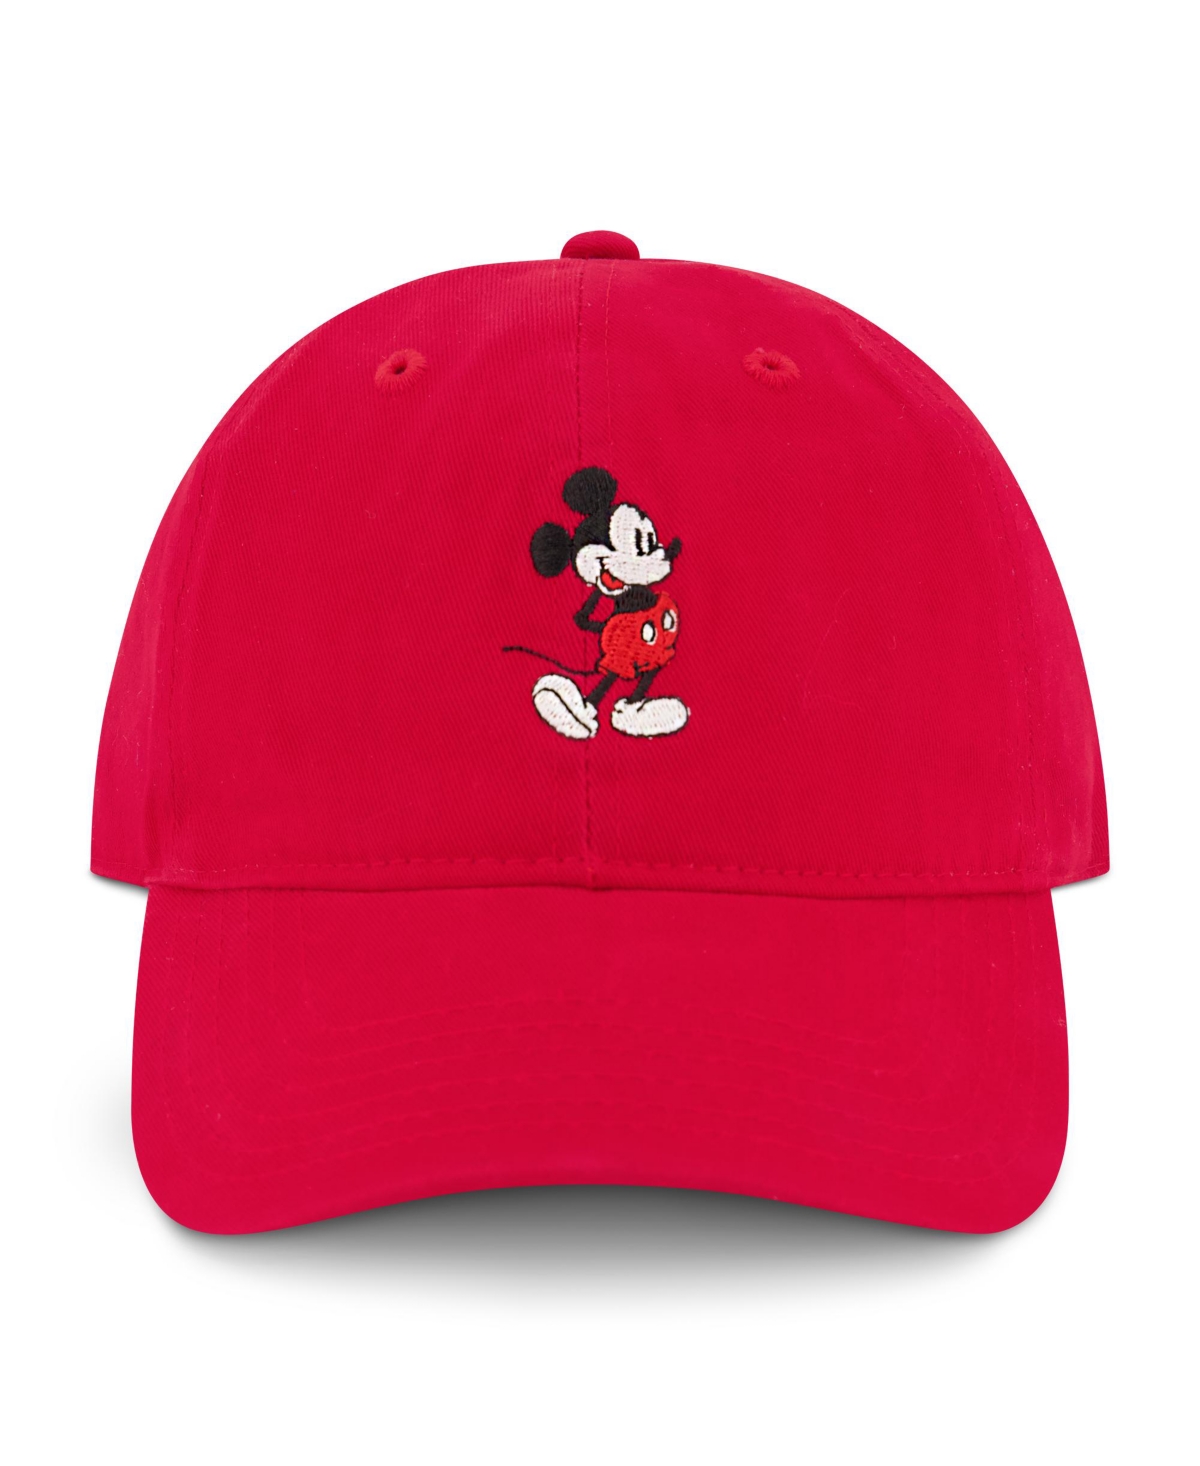 Disney Mickey Mouse Embroidered Cotton Adjustable Dad Hat with Curved Brim - Red